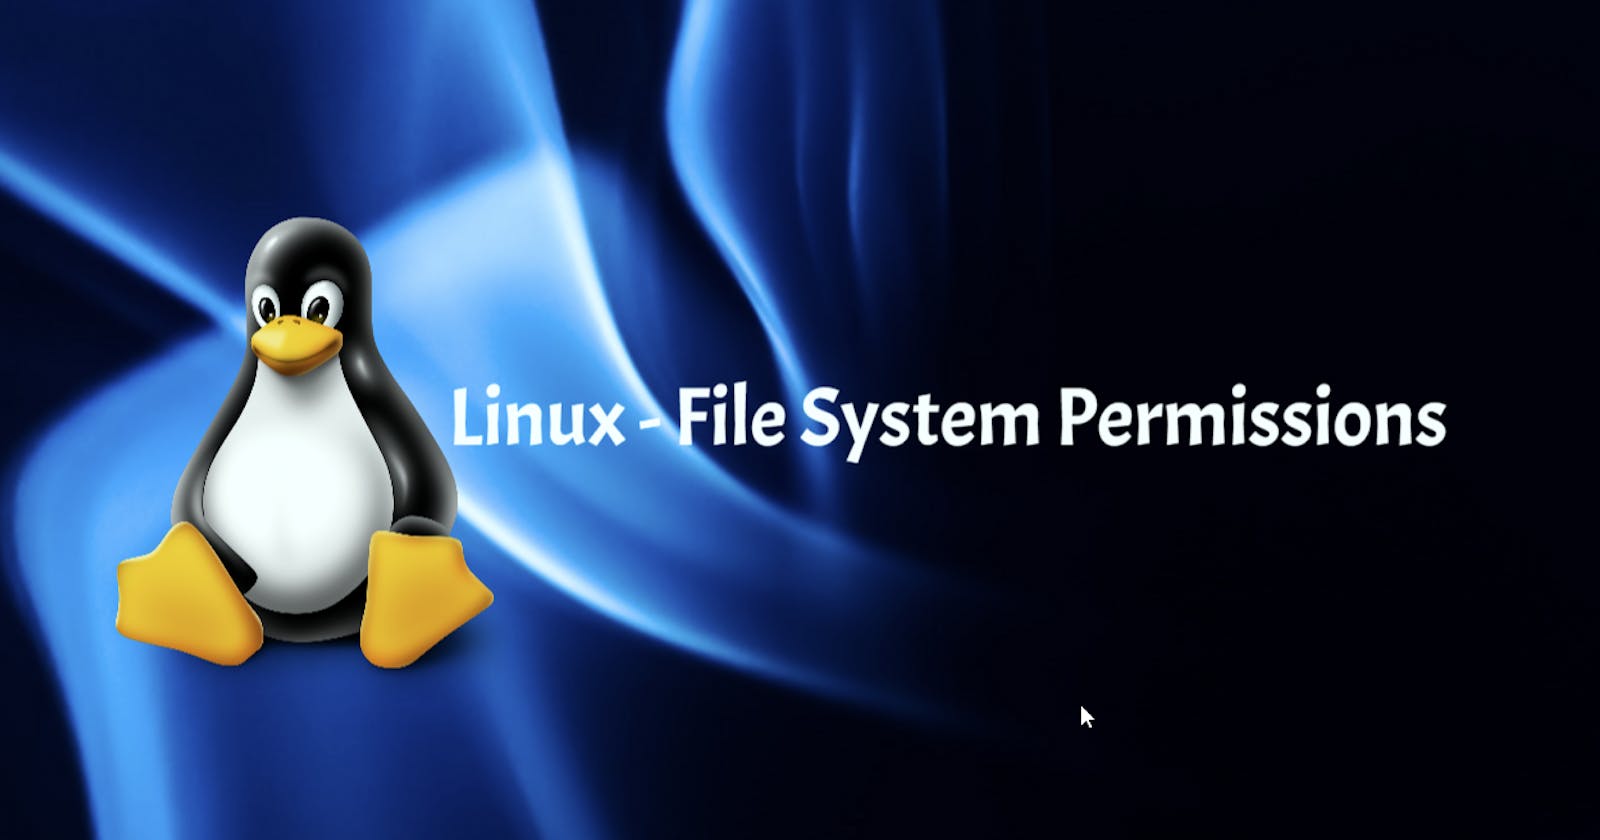 Linux - File System Permissions